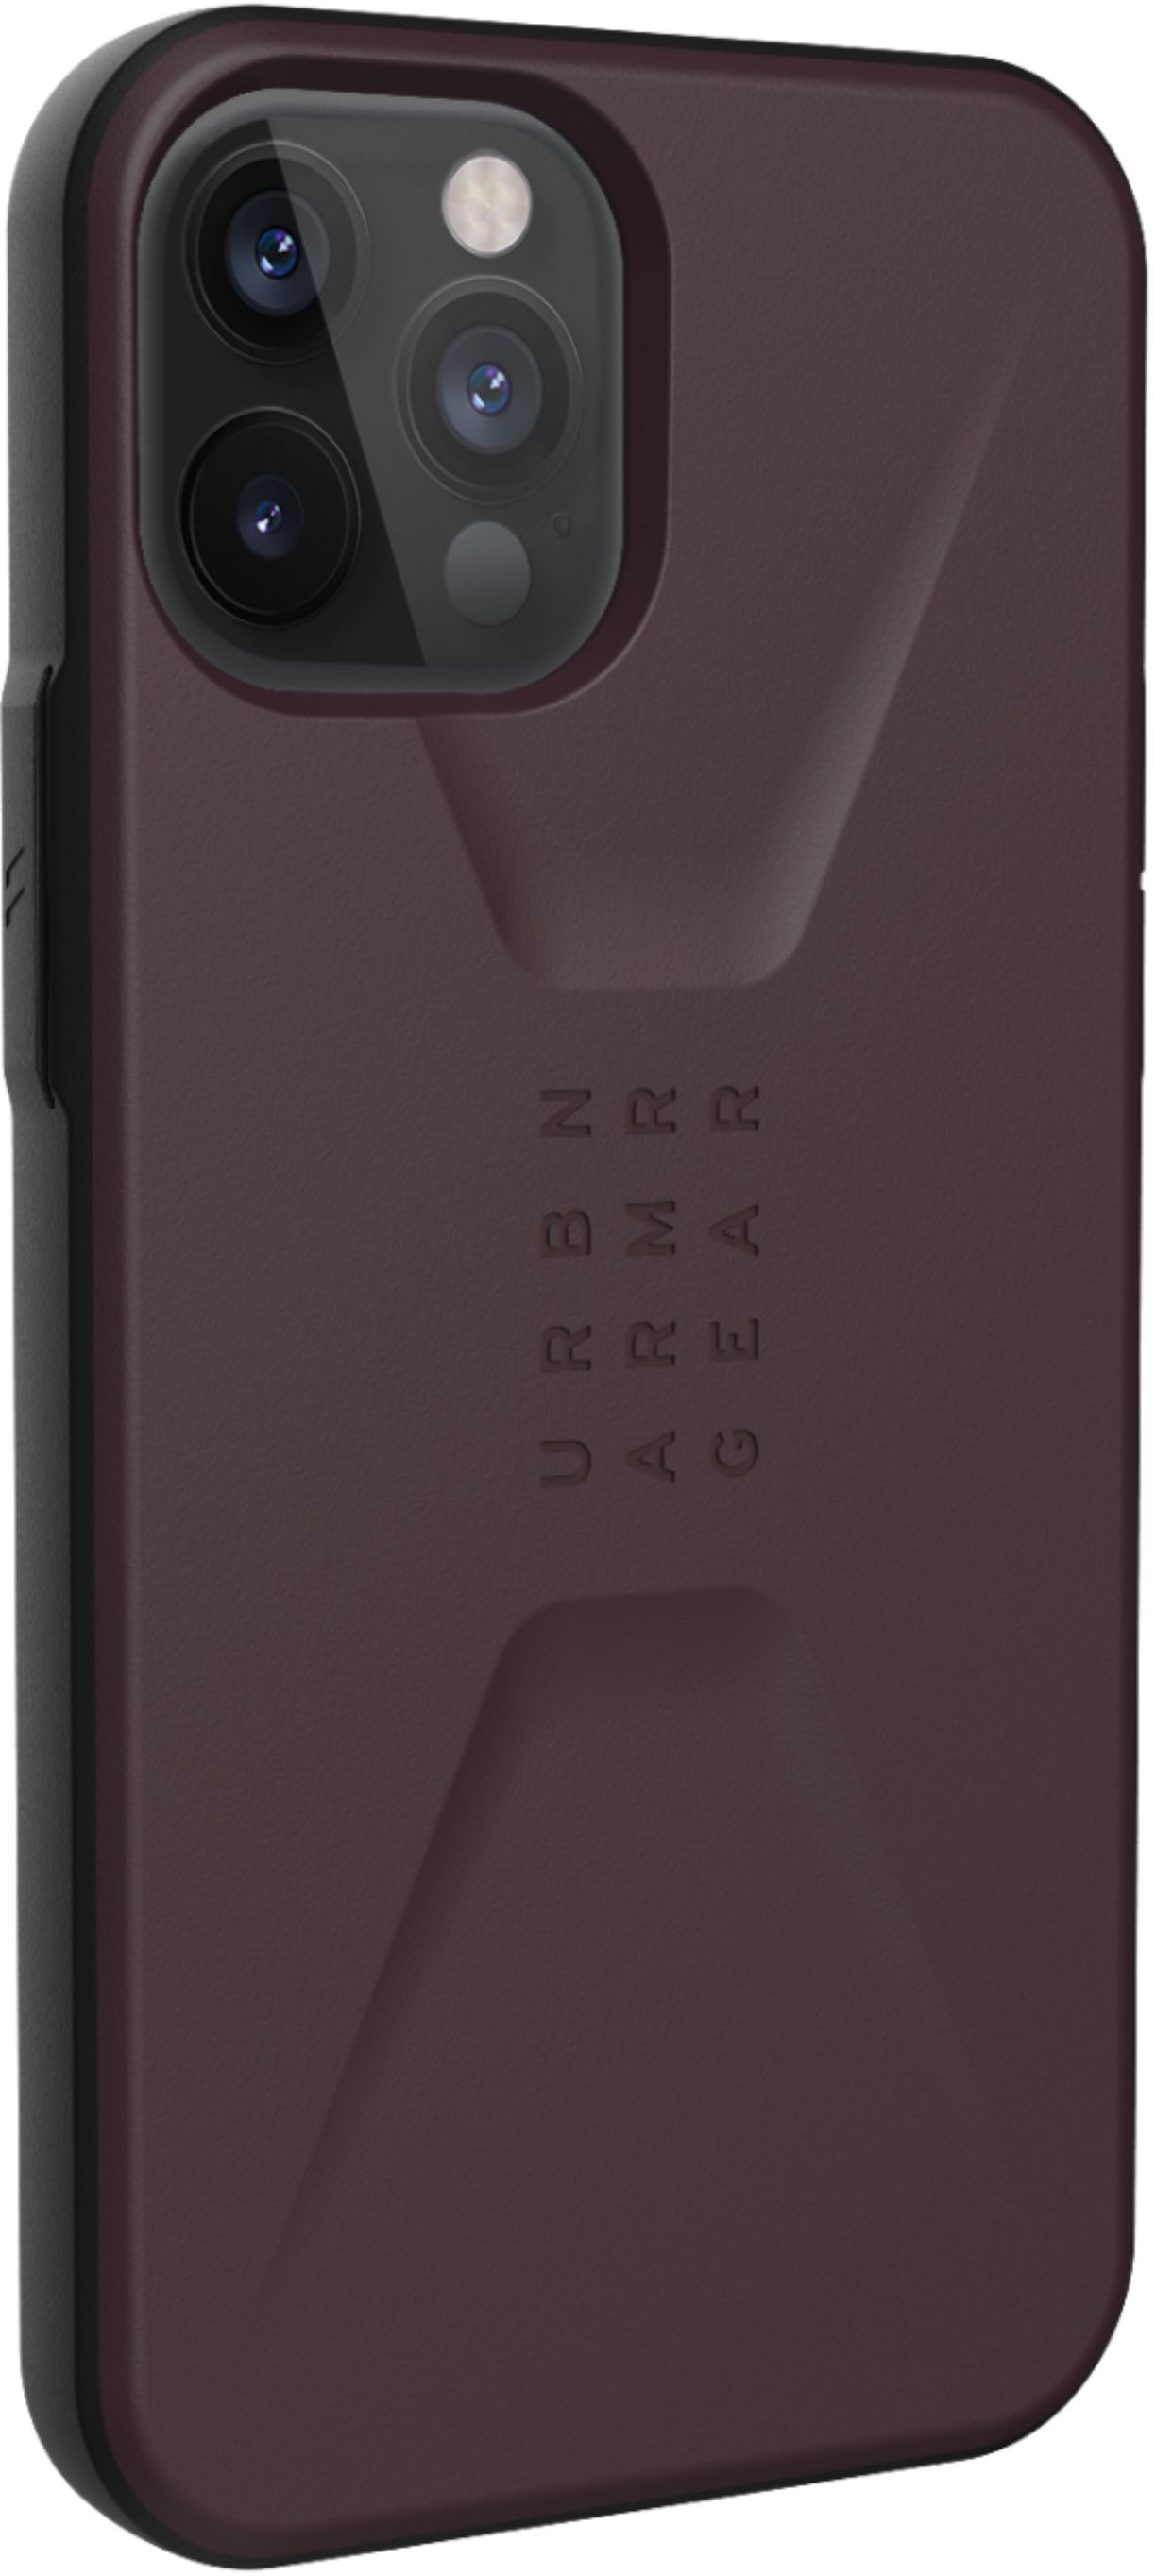 Left View: UAG - Civilian Series Hard shell Case for iPhone 12 Pro Max - Eggplant